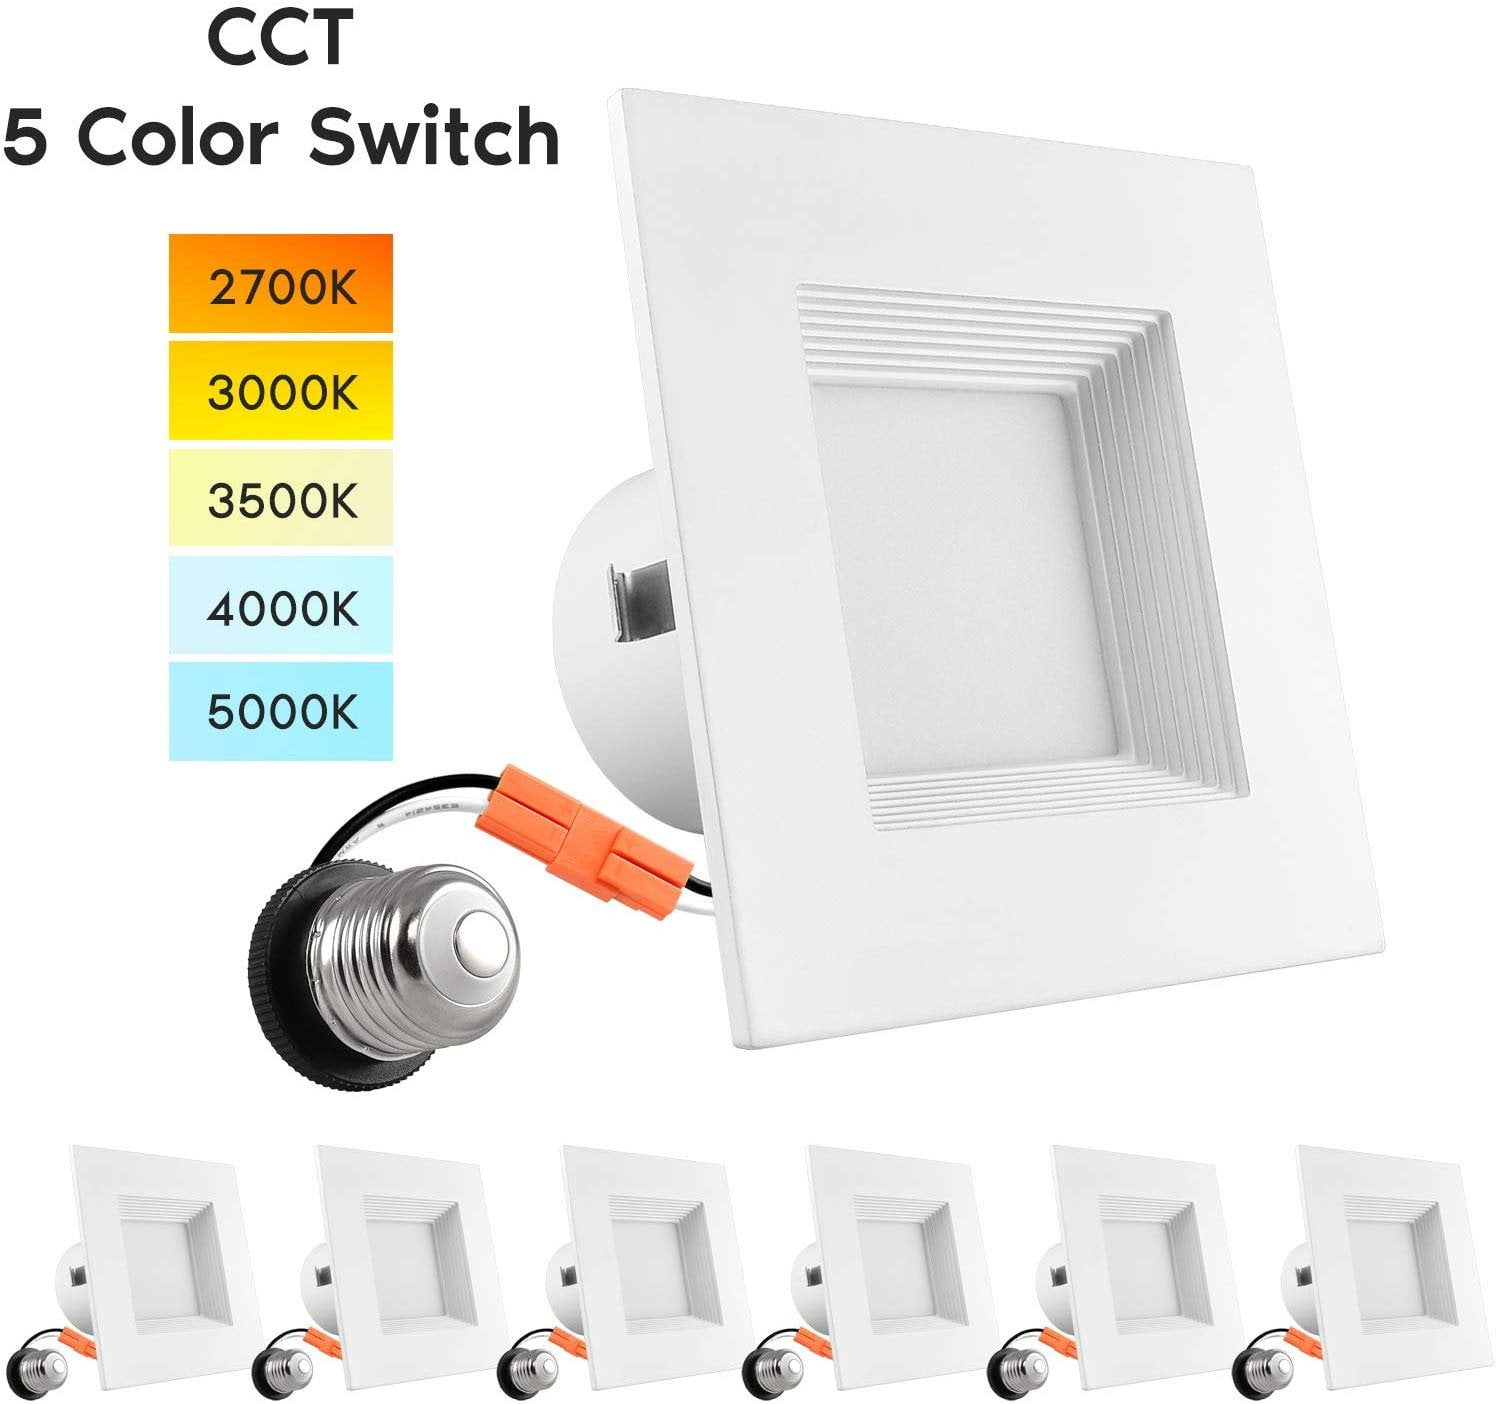 Dimmable Simple Retrofit Installation 850 LM 4000K Cool White 14W=100W Recessed Jbox Fixture Sunco Lighting 6 Pack 6 Inch Slim LED Downlight with Junction Box ETL & Energy Star SC6SLIM6PK4K 